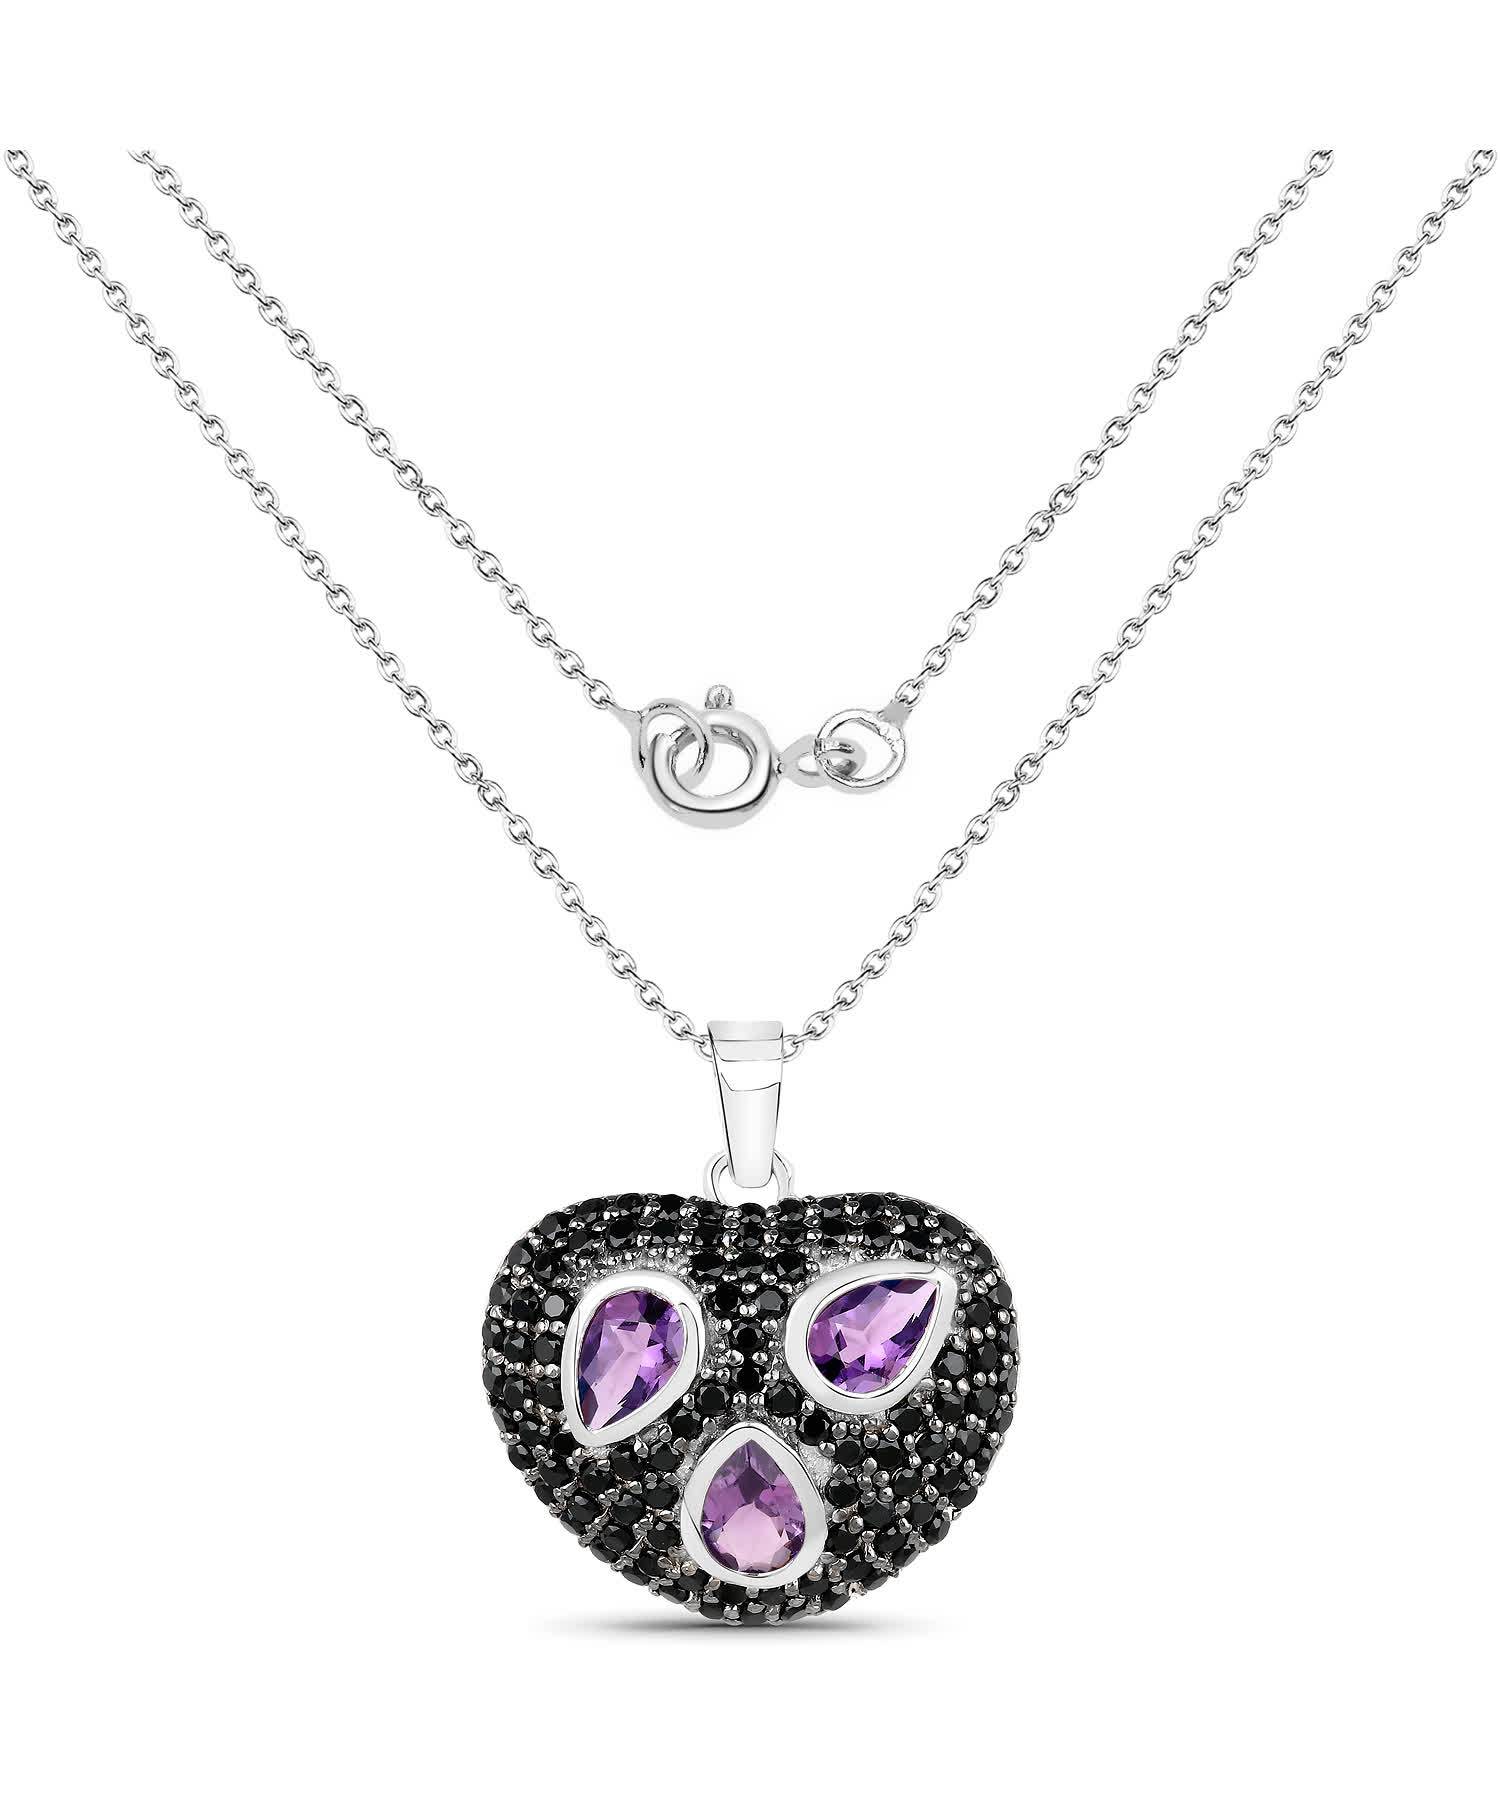 3.00ctw Natural Amethyst and Black Spinel Rhodium Plated 925 Sterling Silver Heart Pendant With Chain View 2